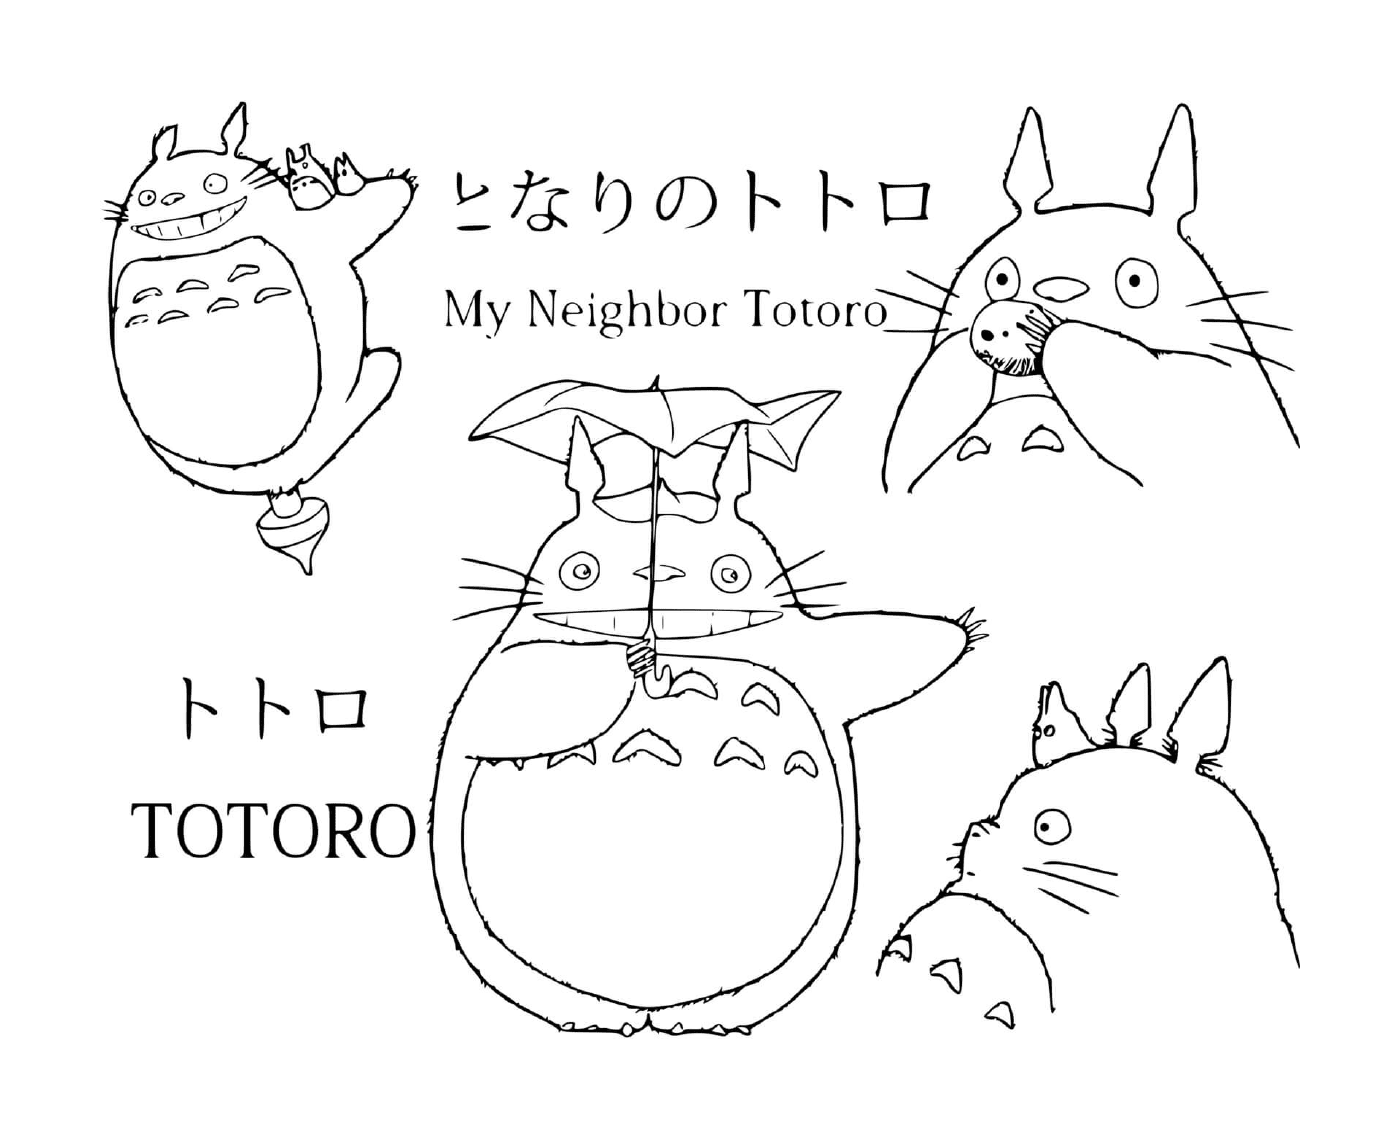  Group of Totoro drawn in different poses 